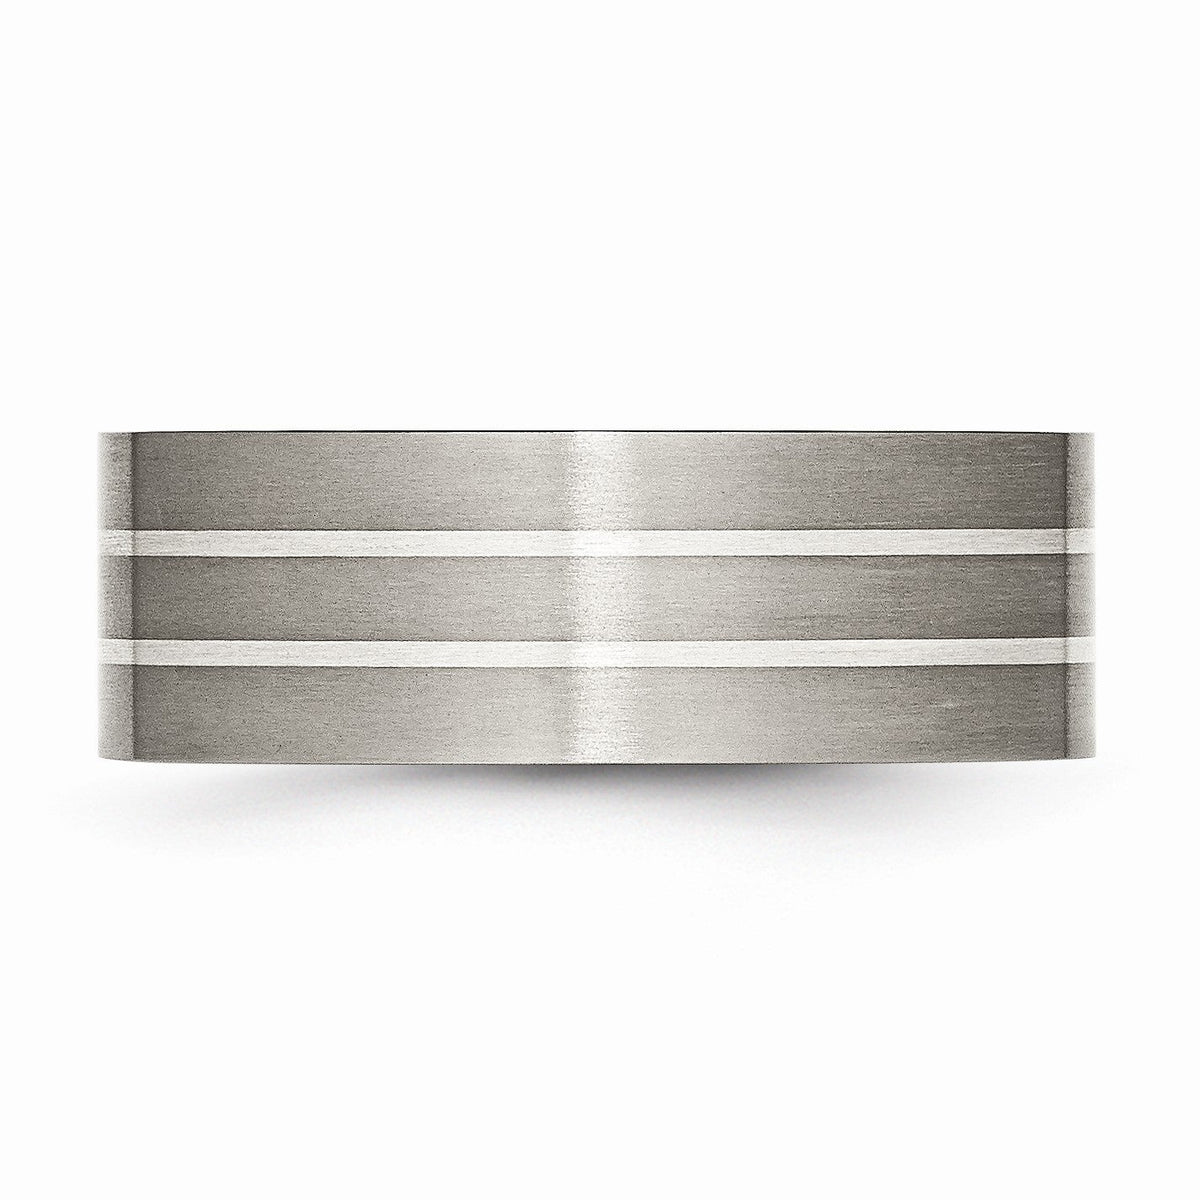 Alternate view of the Titanium &amp; Sterling Silver Inlay, 8mm Flat Brushed Comfort Fit Band by The Black Bow Jewelry Co.